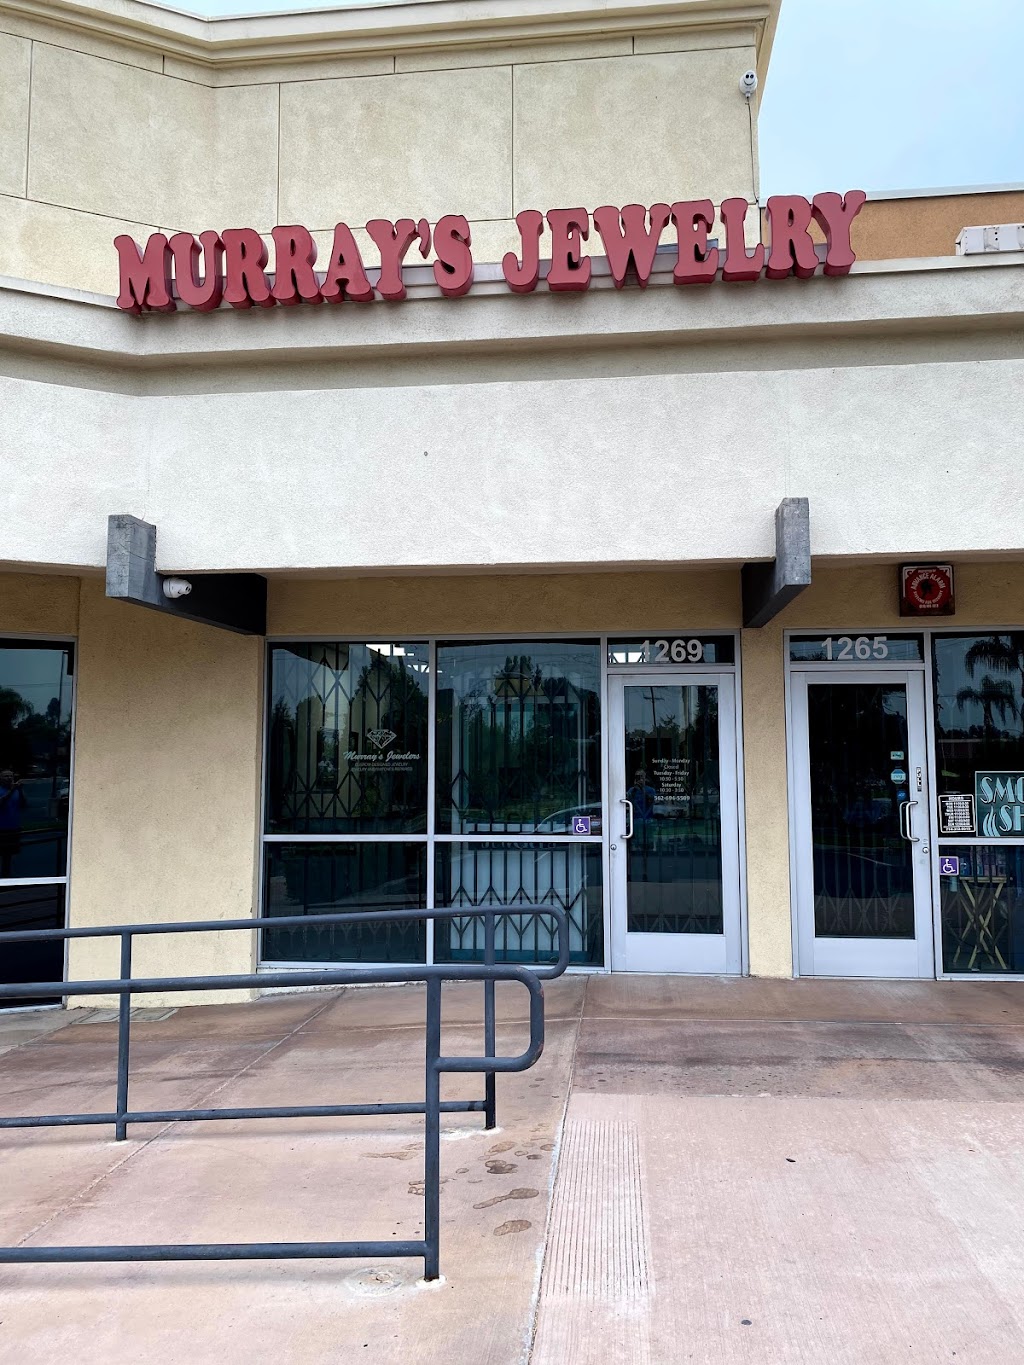 Murrays Jewelers | 1269 W Central Ave, Brea, CA 92821, USA | Phone: (562) 694-5509